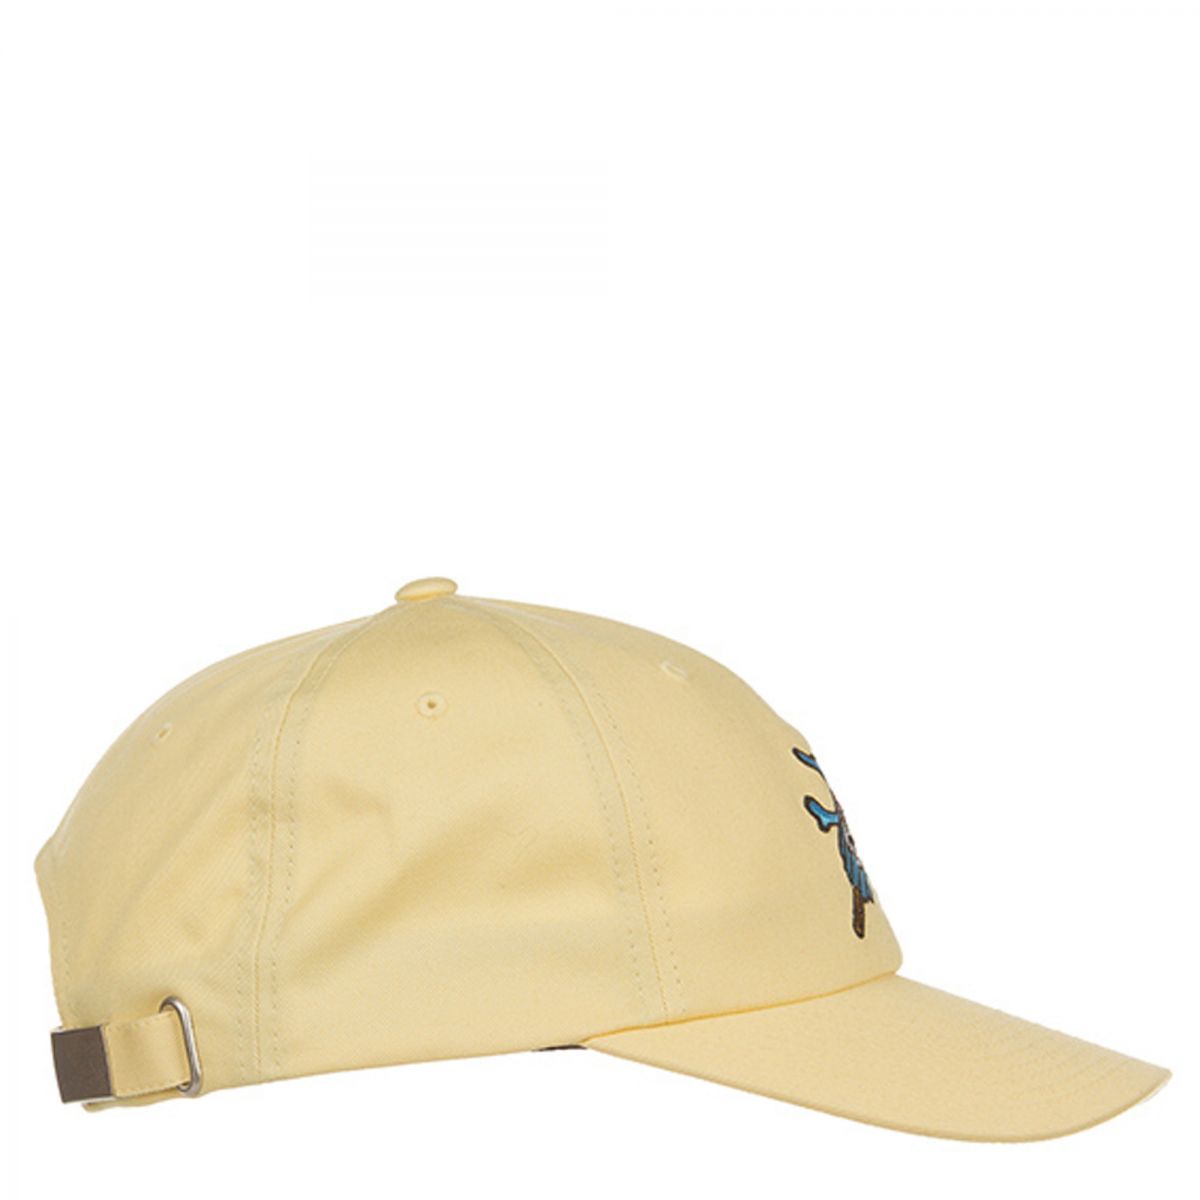 ICE CREAM Mariano Dad Hat in Mellow Yellow 401-2805-YEL - Karmaloop